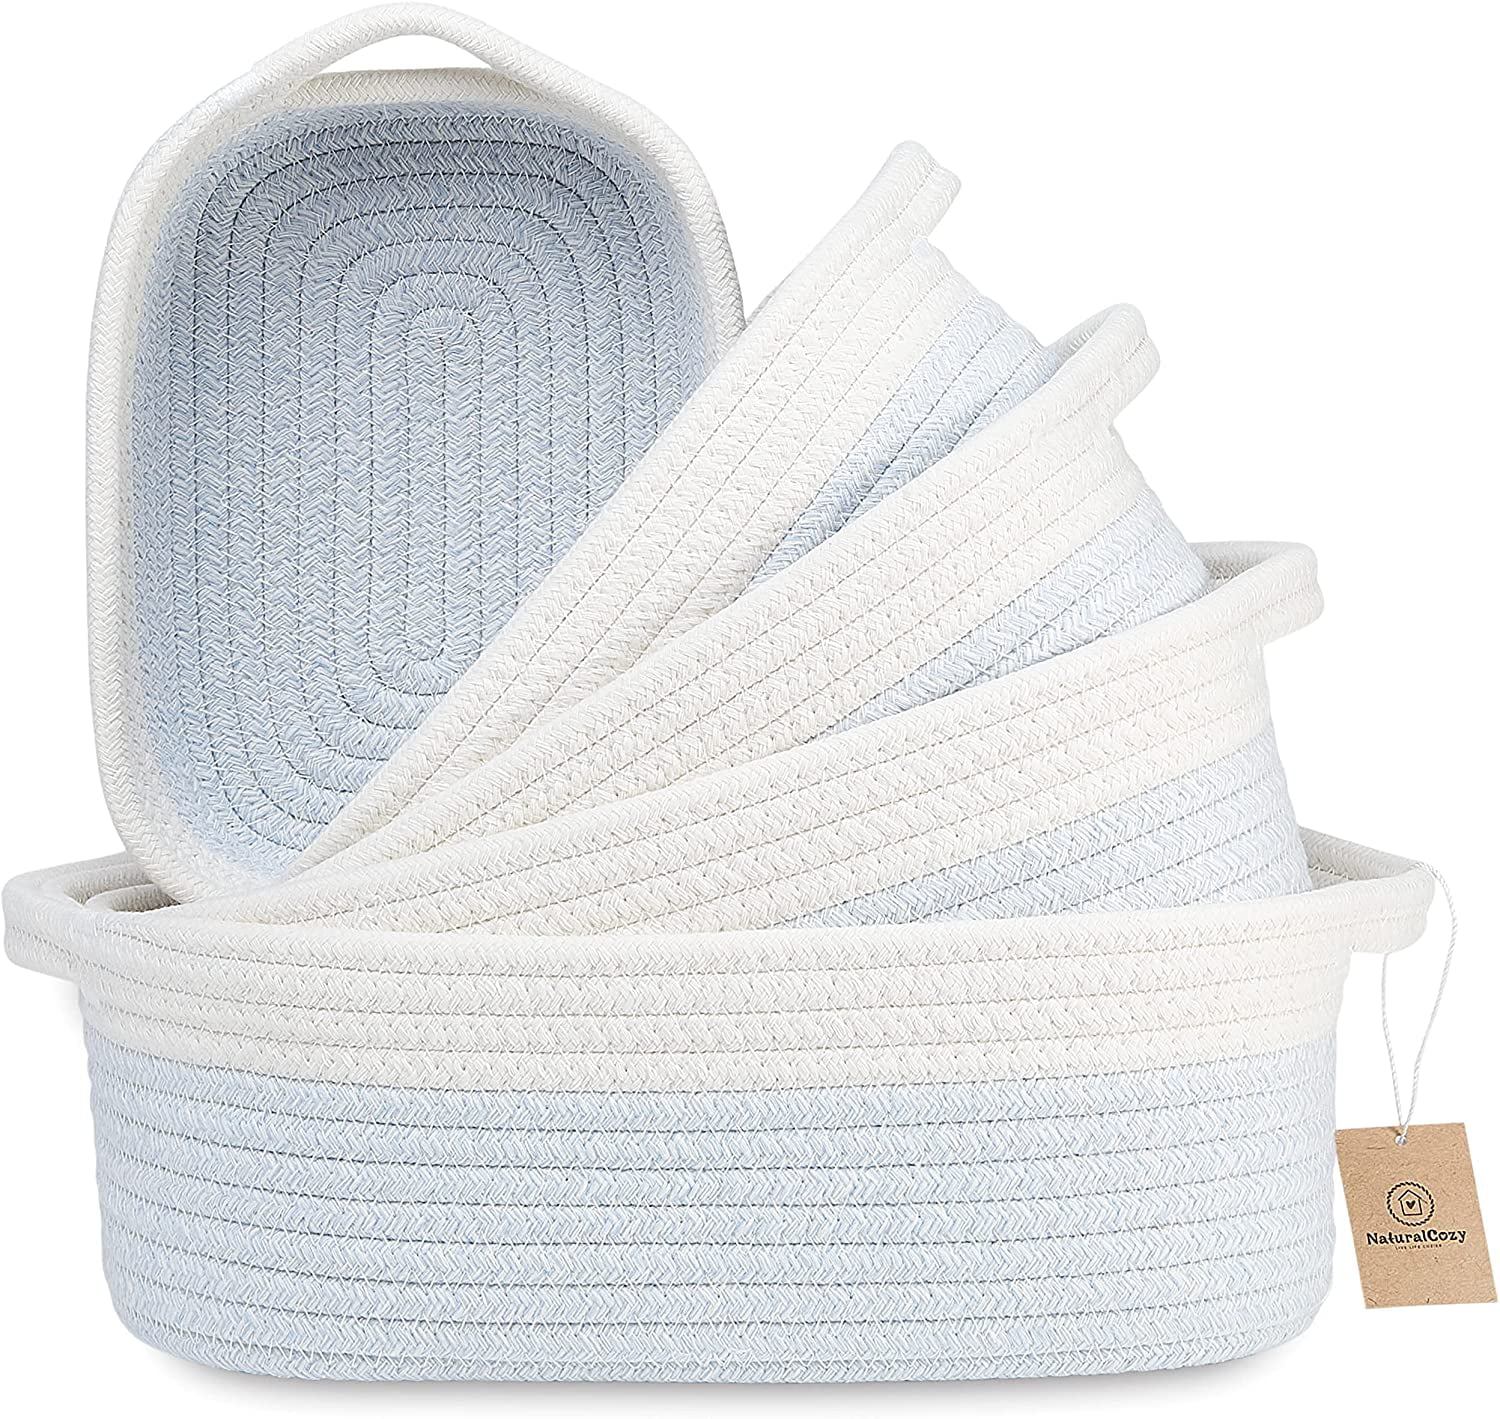 100% Natural Cotton Off White & Baby Blue Toy Basket Gift Oval Woven Storage Basket Set NaturalCozy 3-Piece Cotton Rope Baskets with Handles Cat Dog Toy Baskets Small Soft Baby Nursery Baskets 